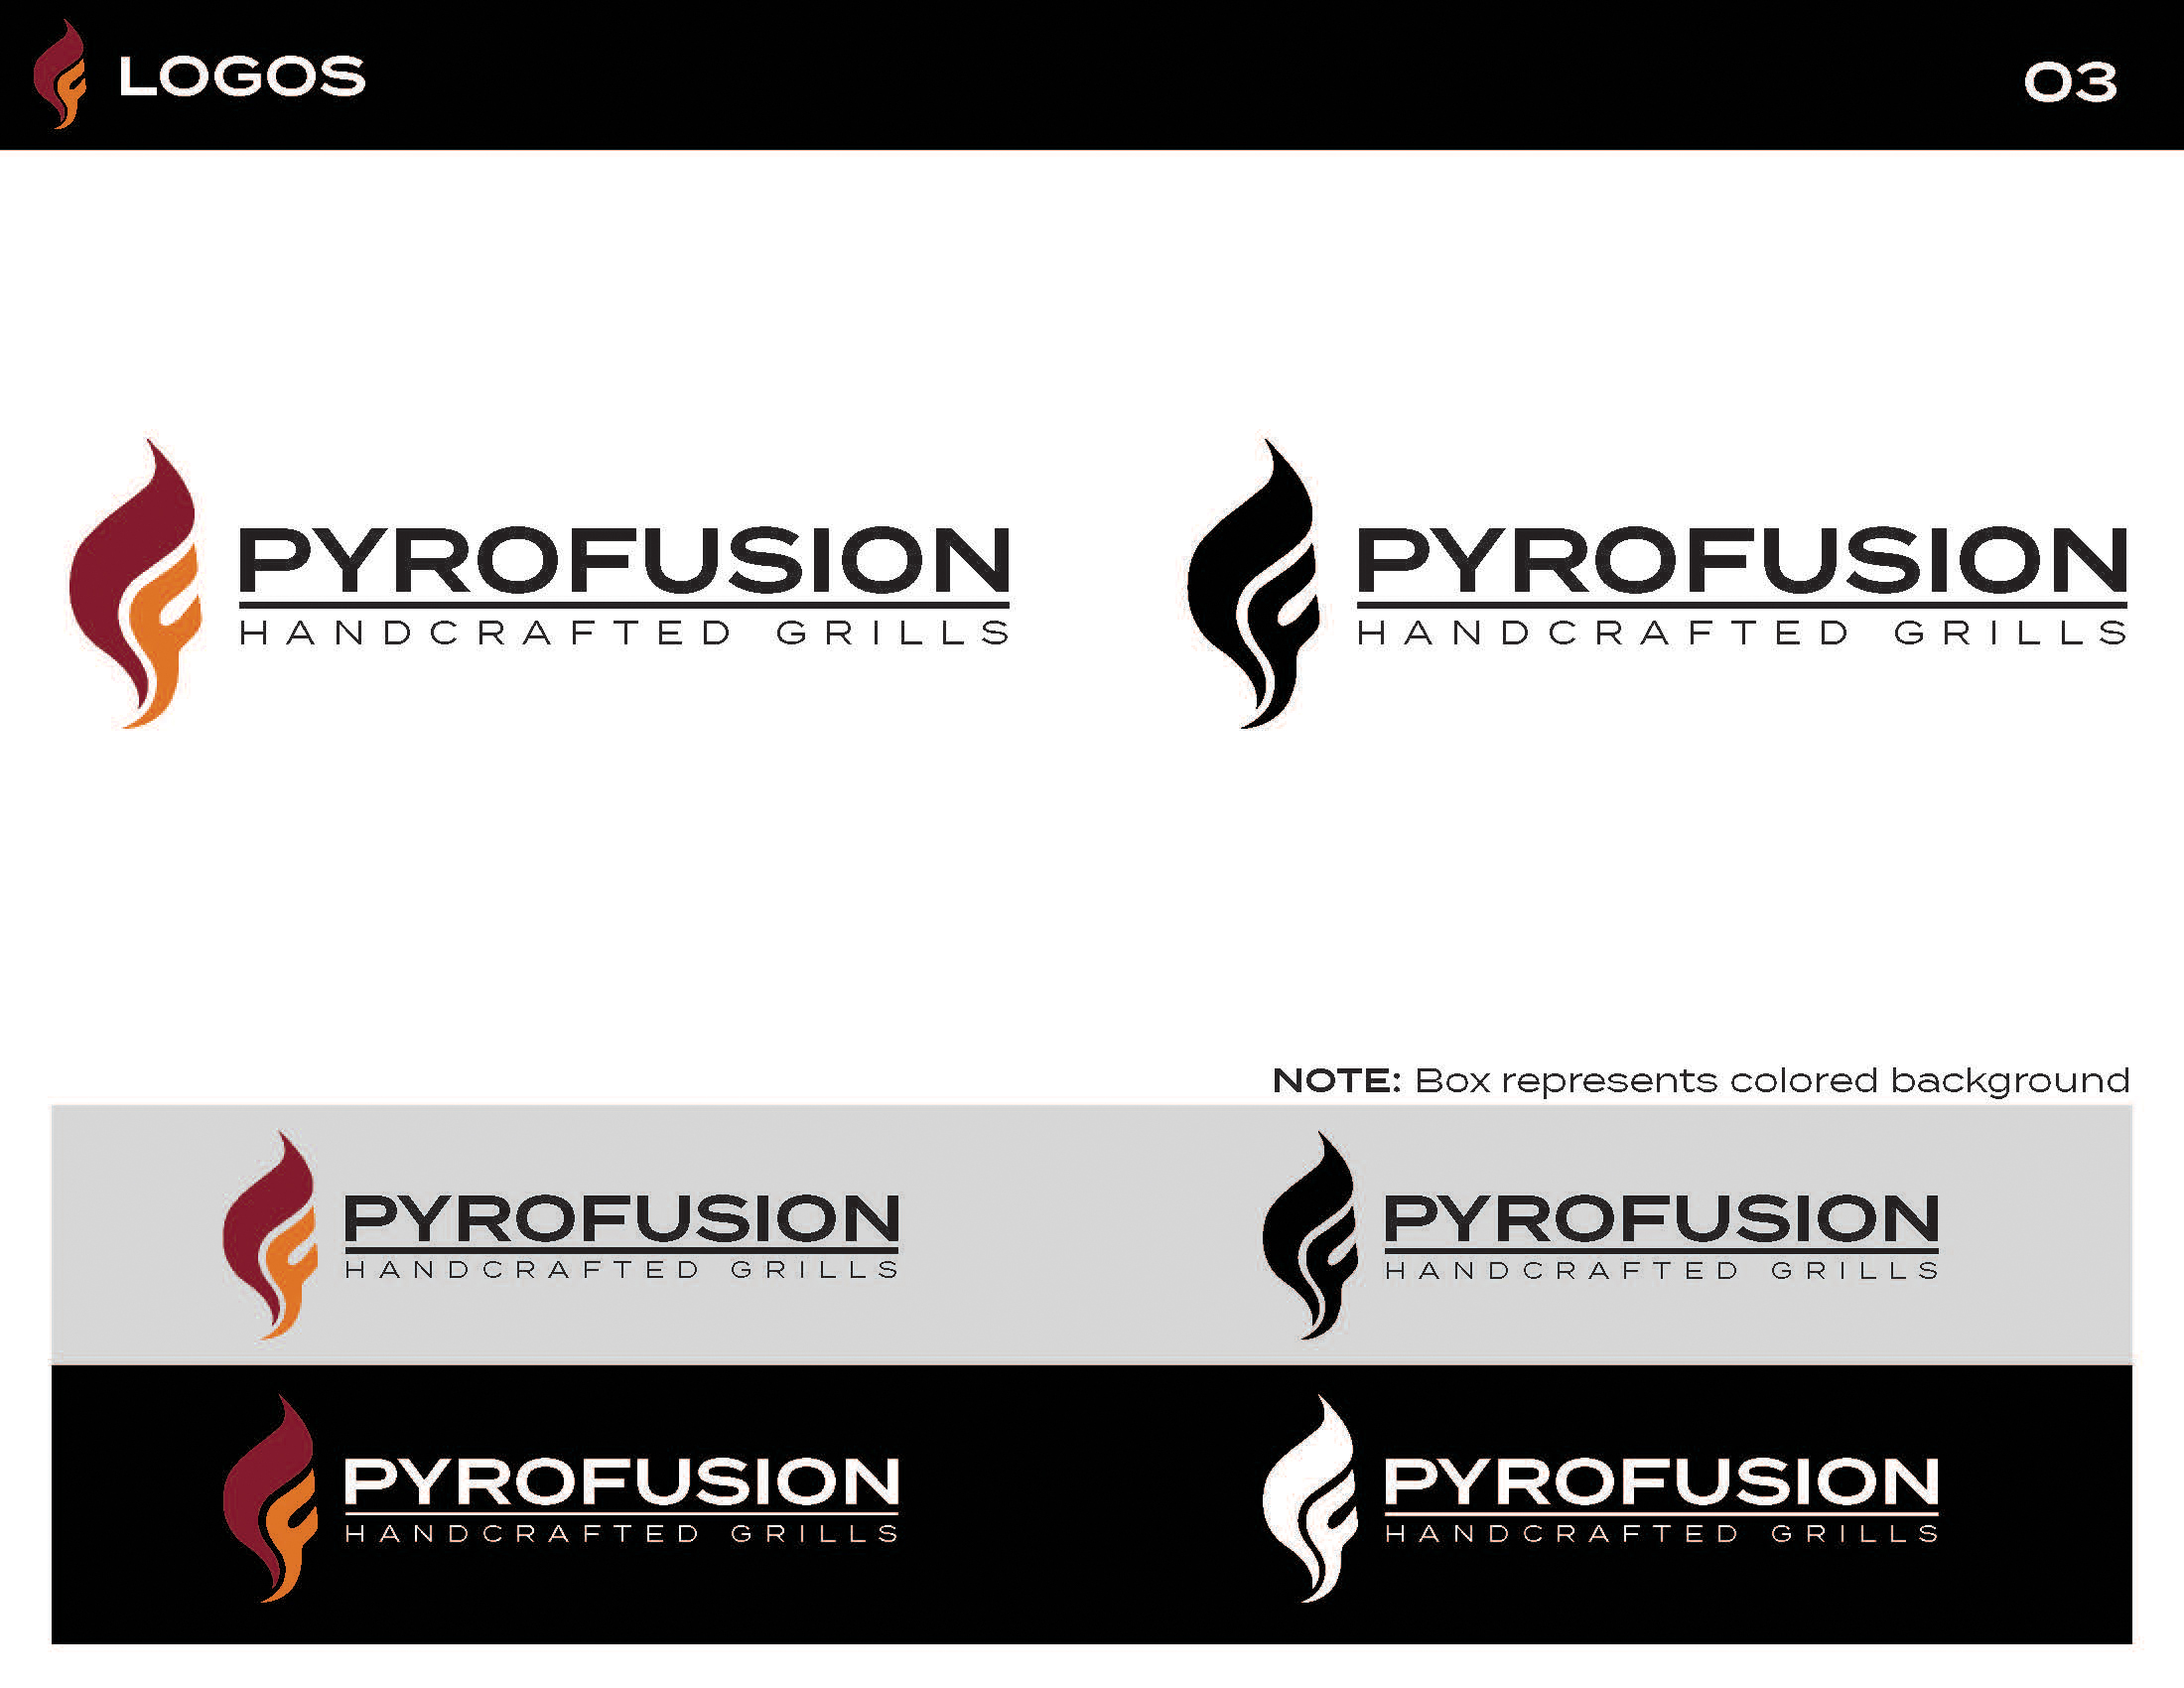 PYROFUSION Brand Guidelines